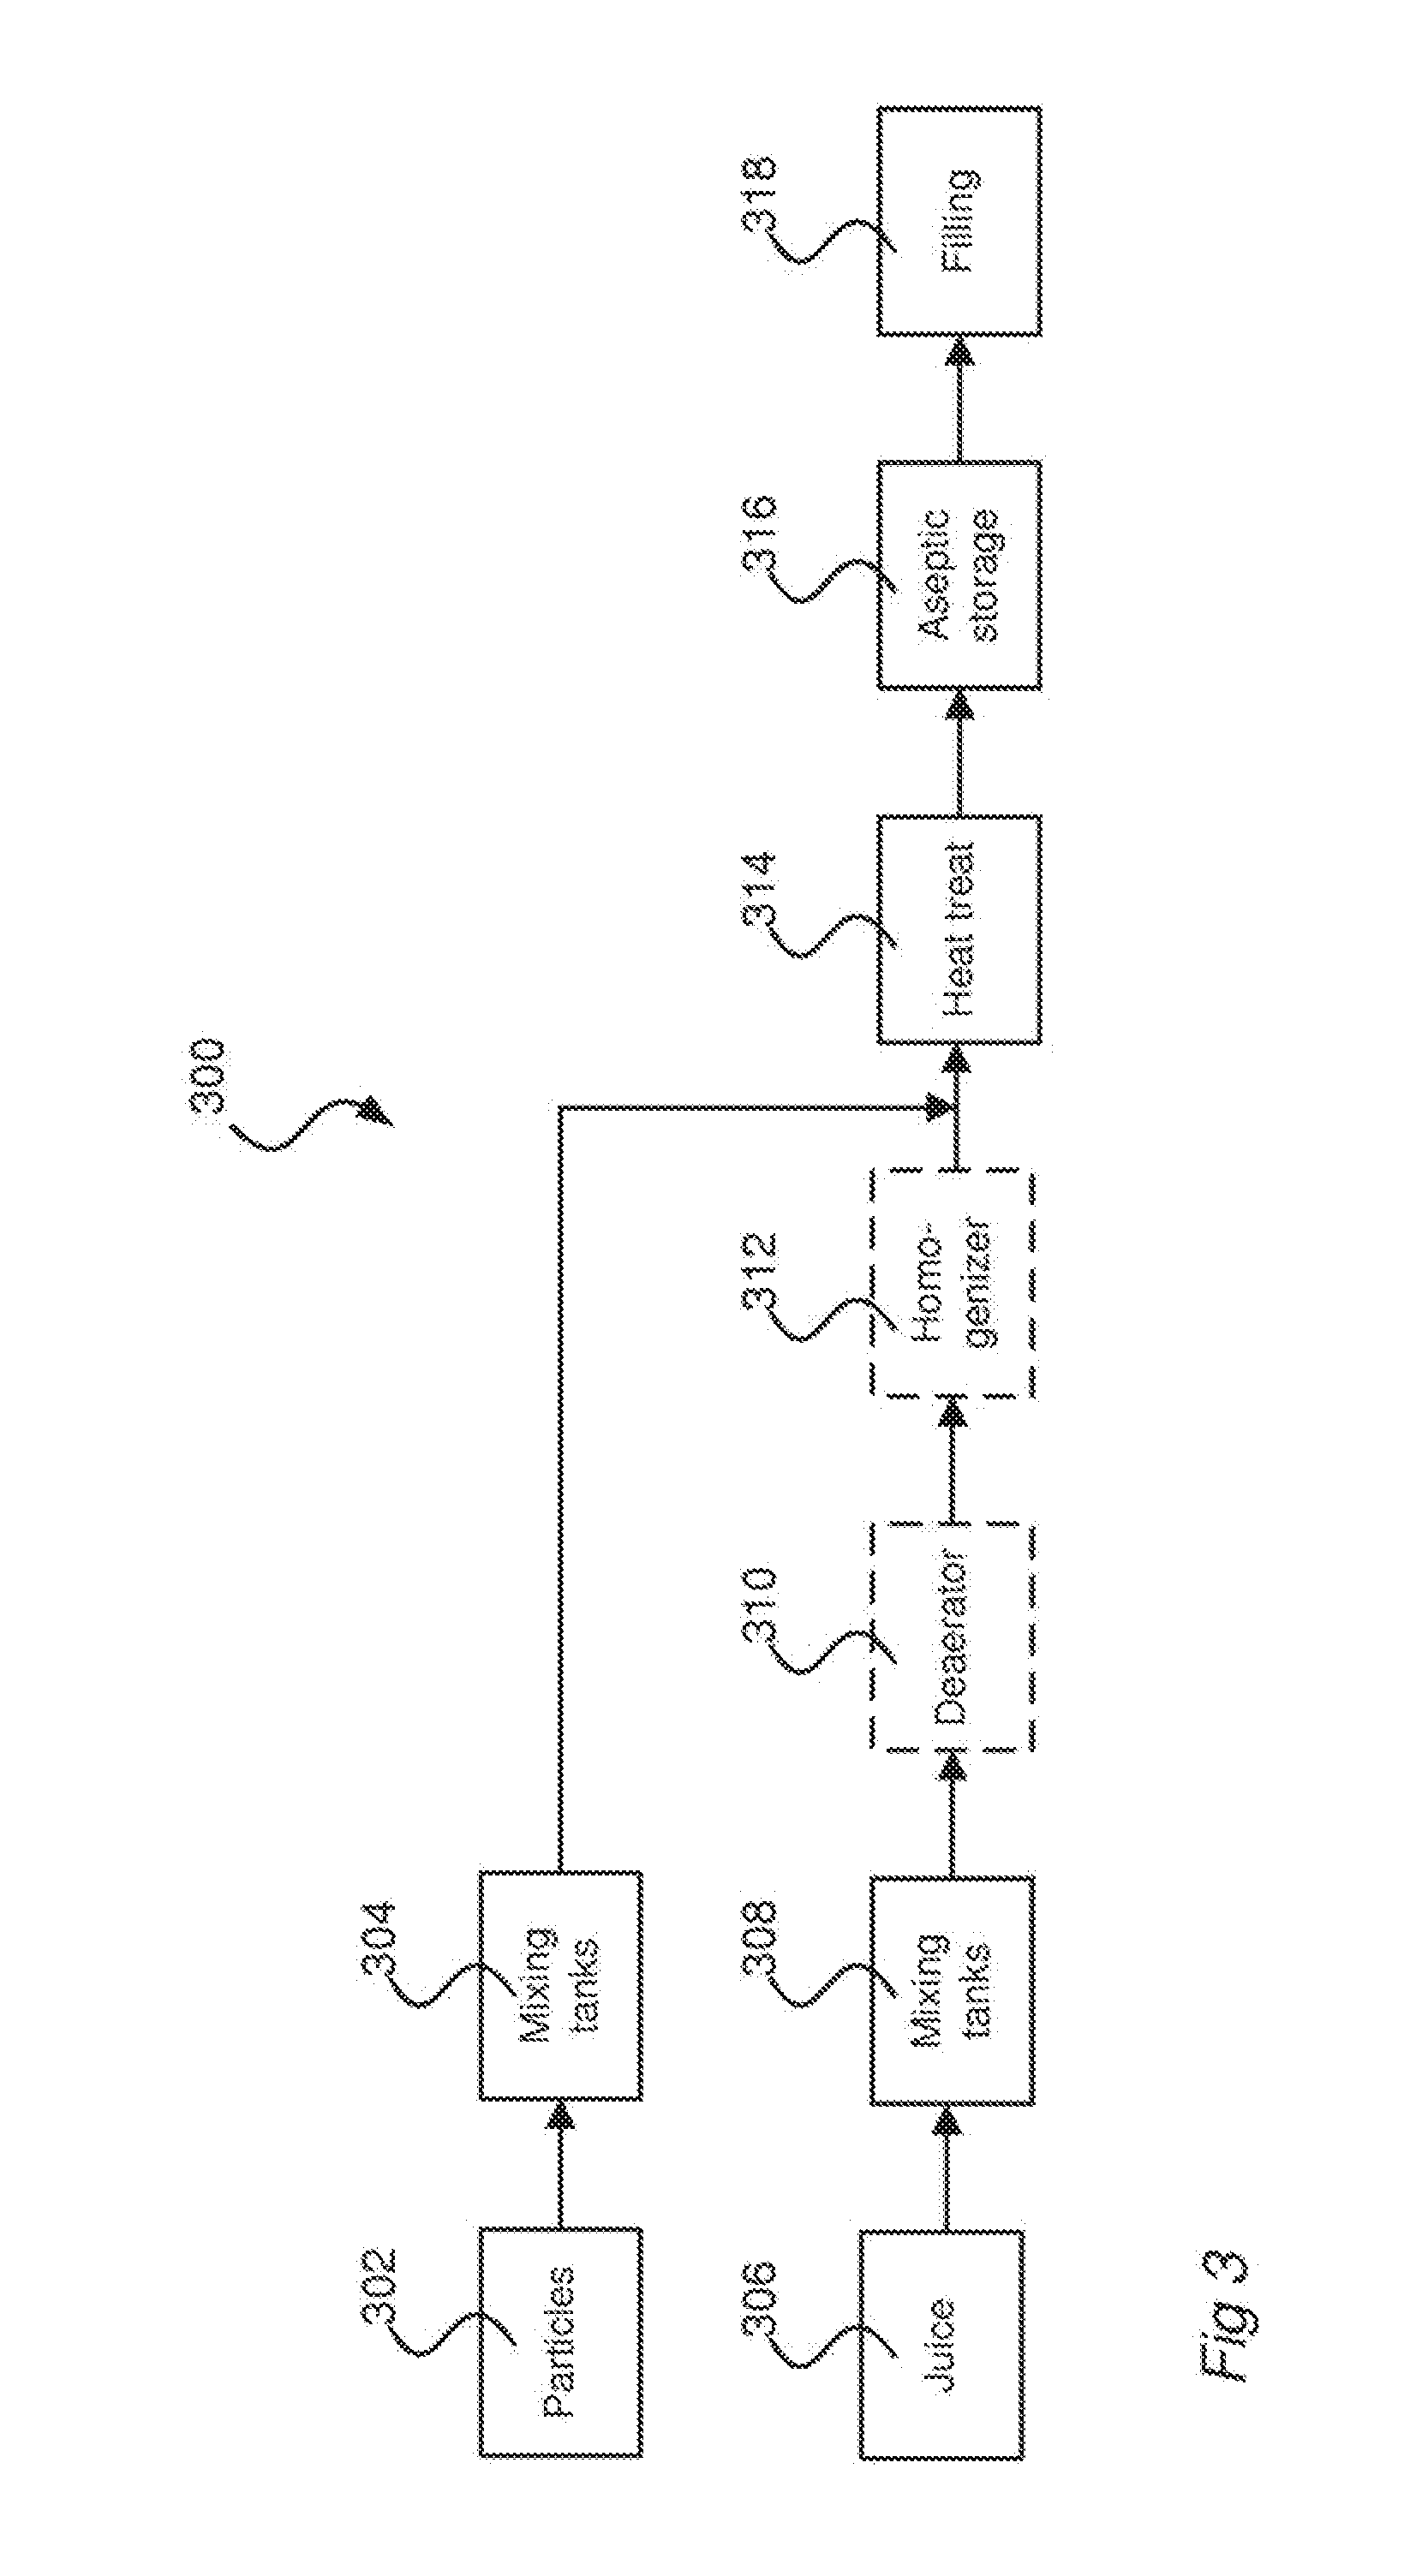 System and method for processing liquid or semi-liquid food products with particles